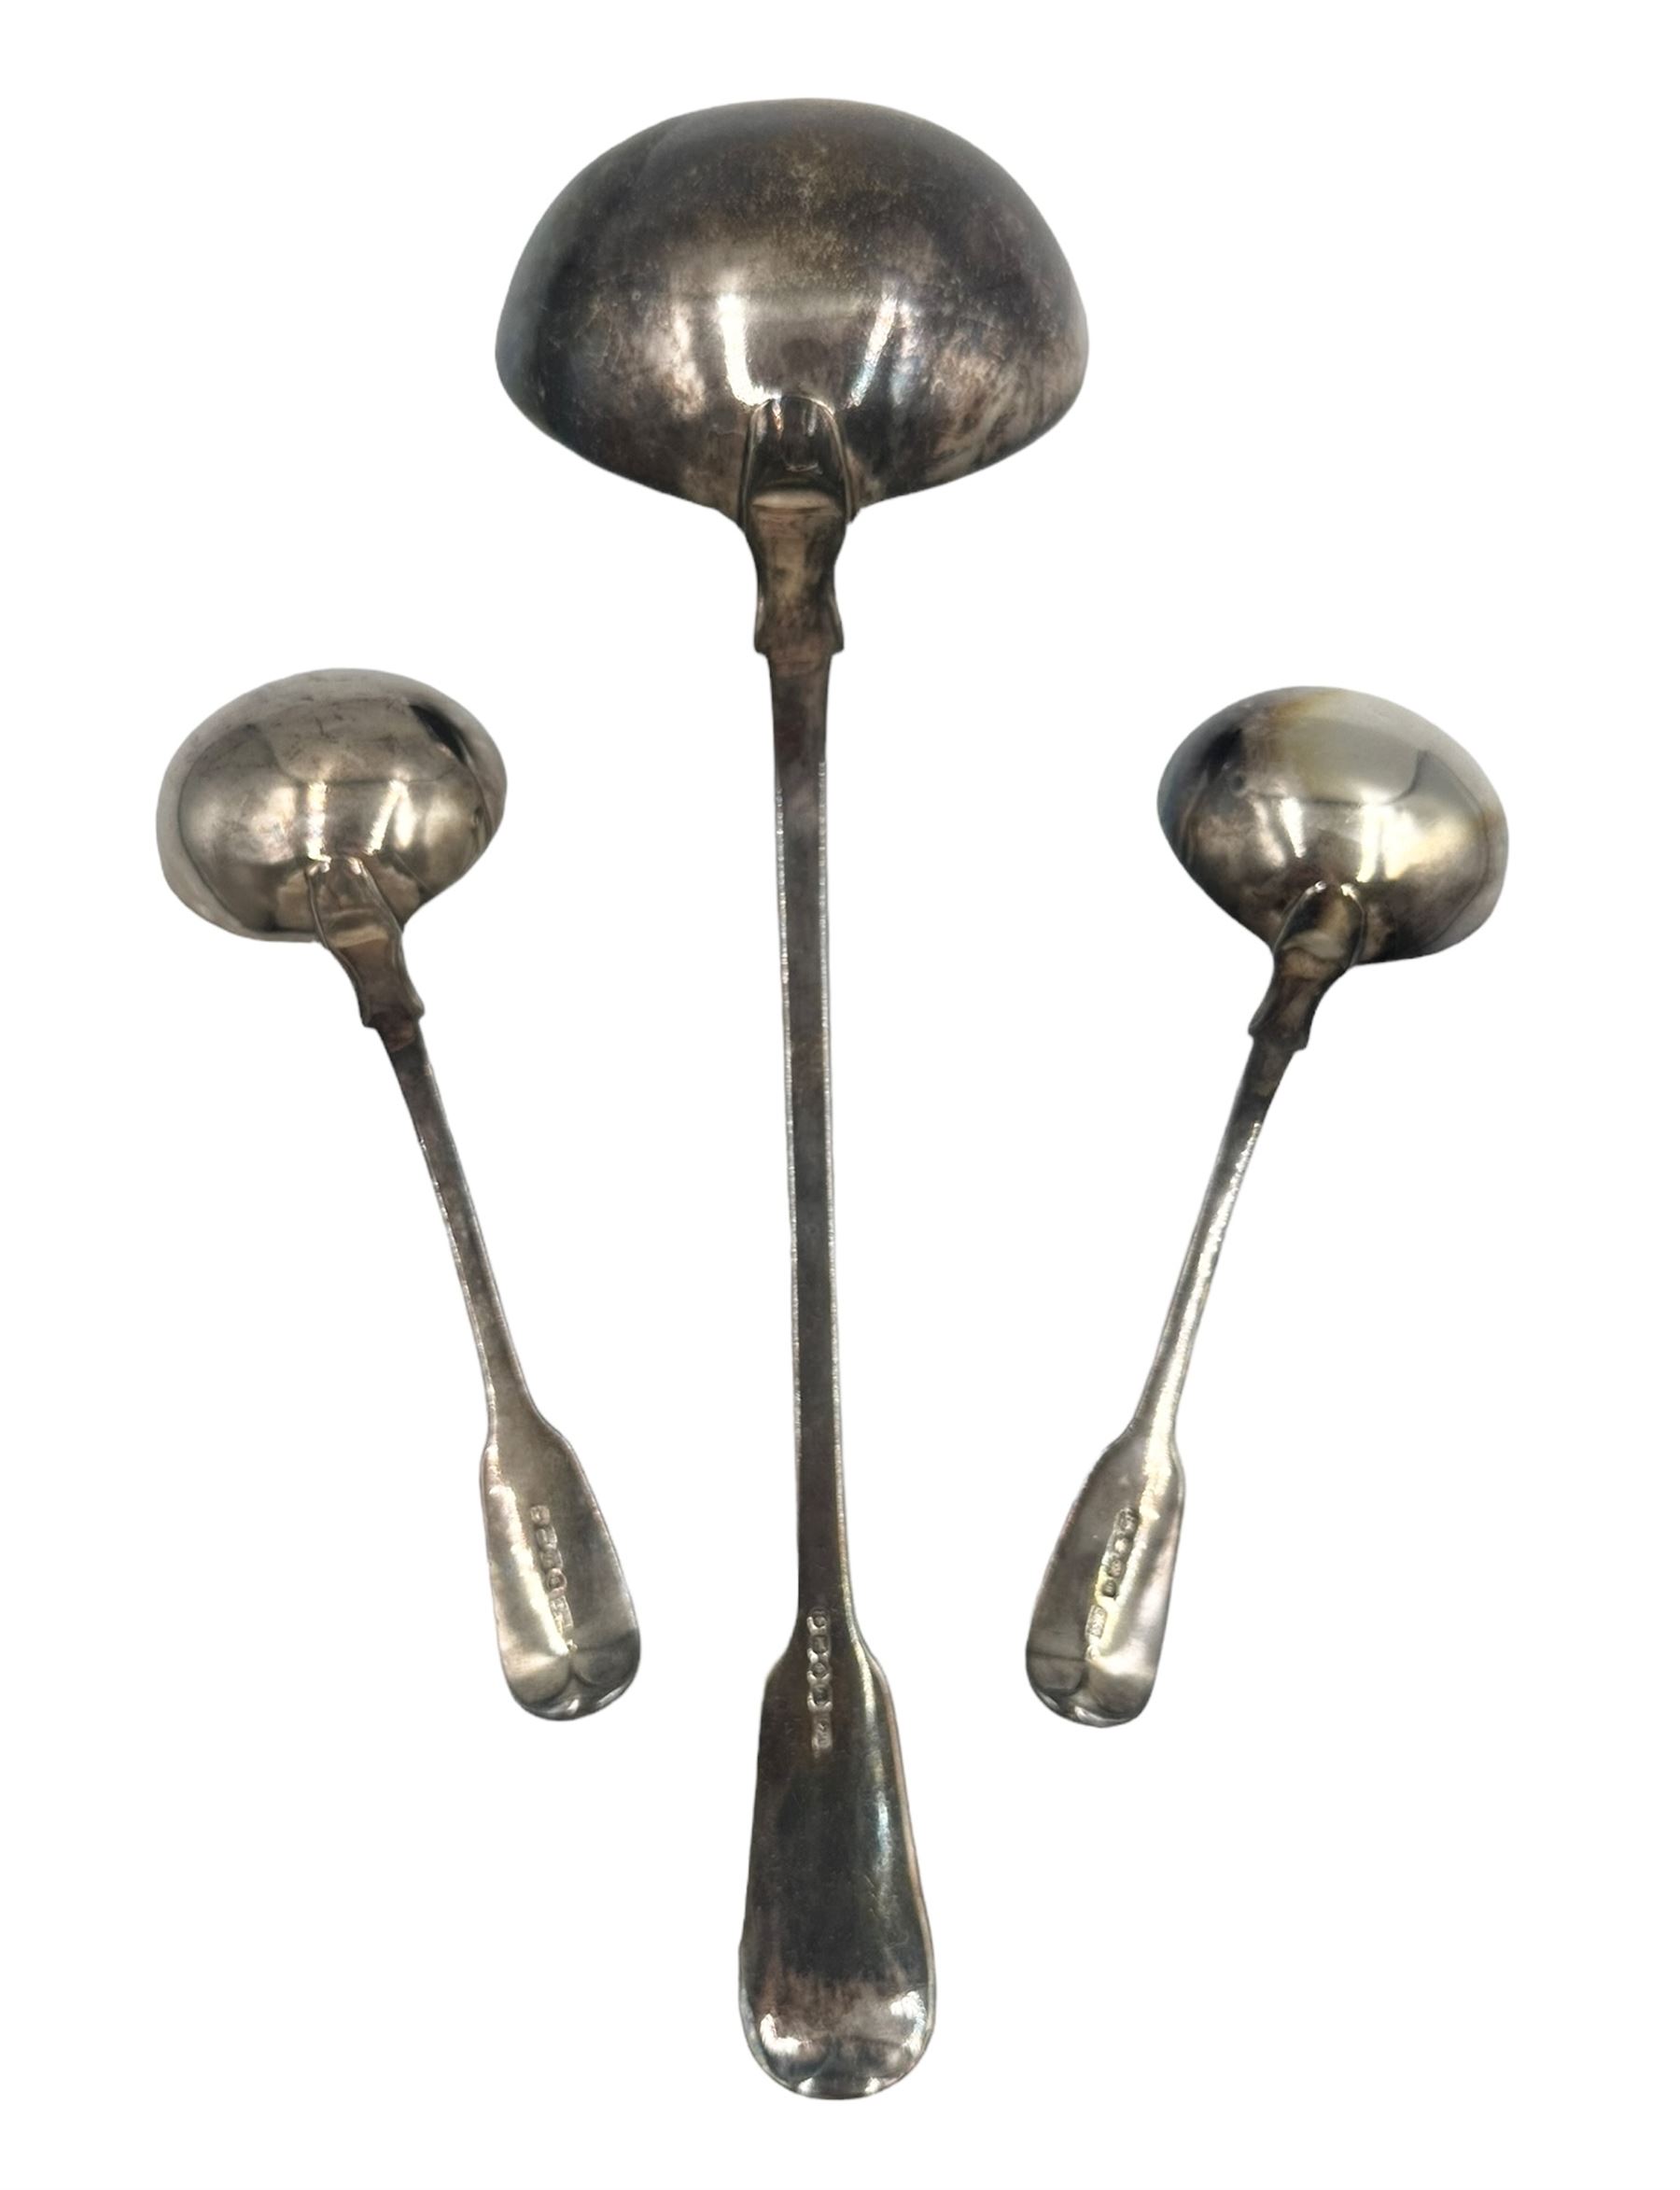 George IV silver fiddle pattern soup ladle engraved with initials London 1825 Maker William Chawner - Image 2 of 5